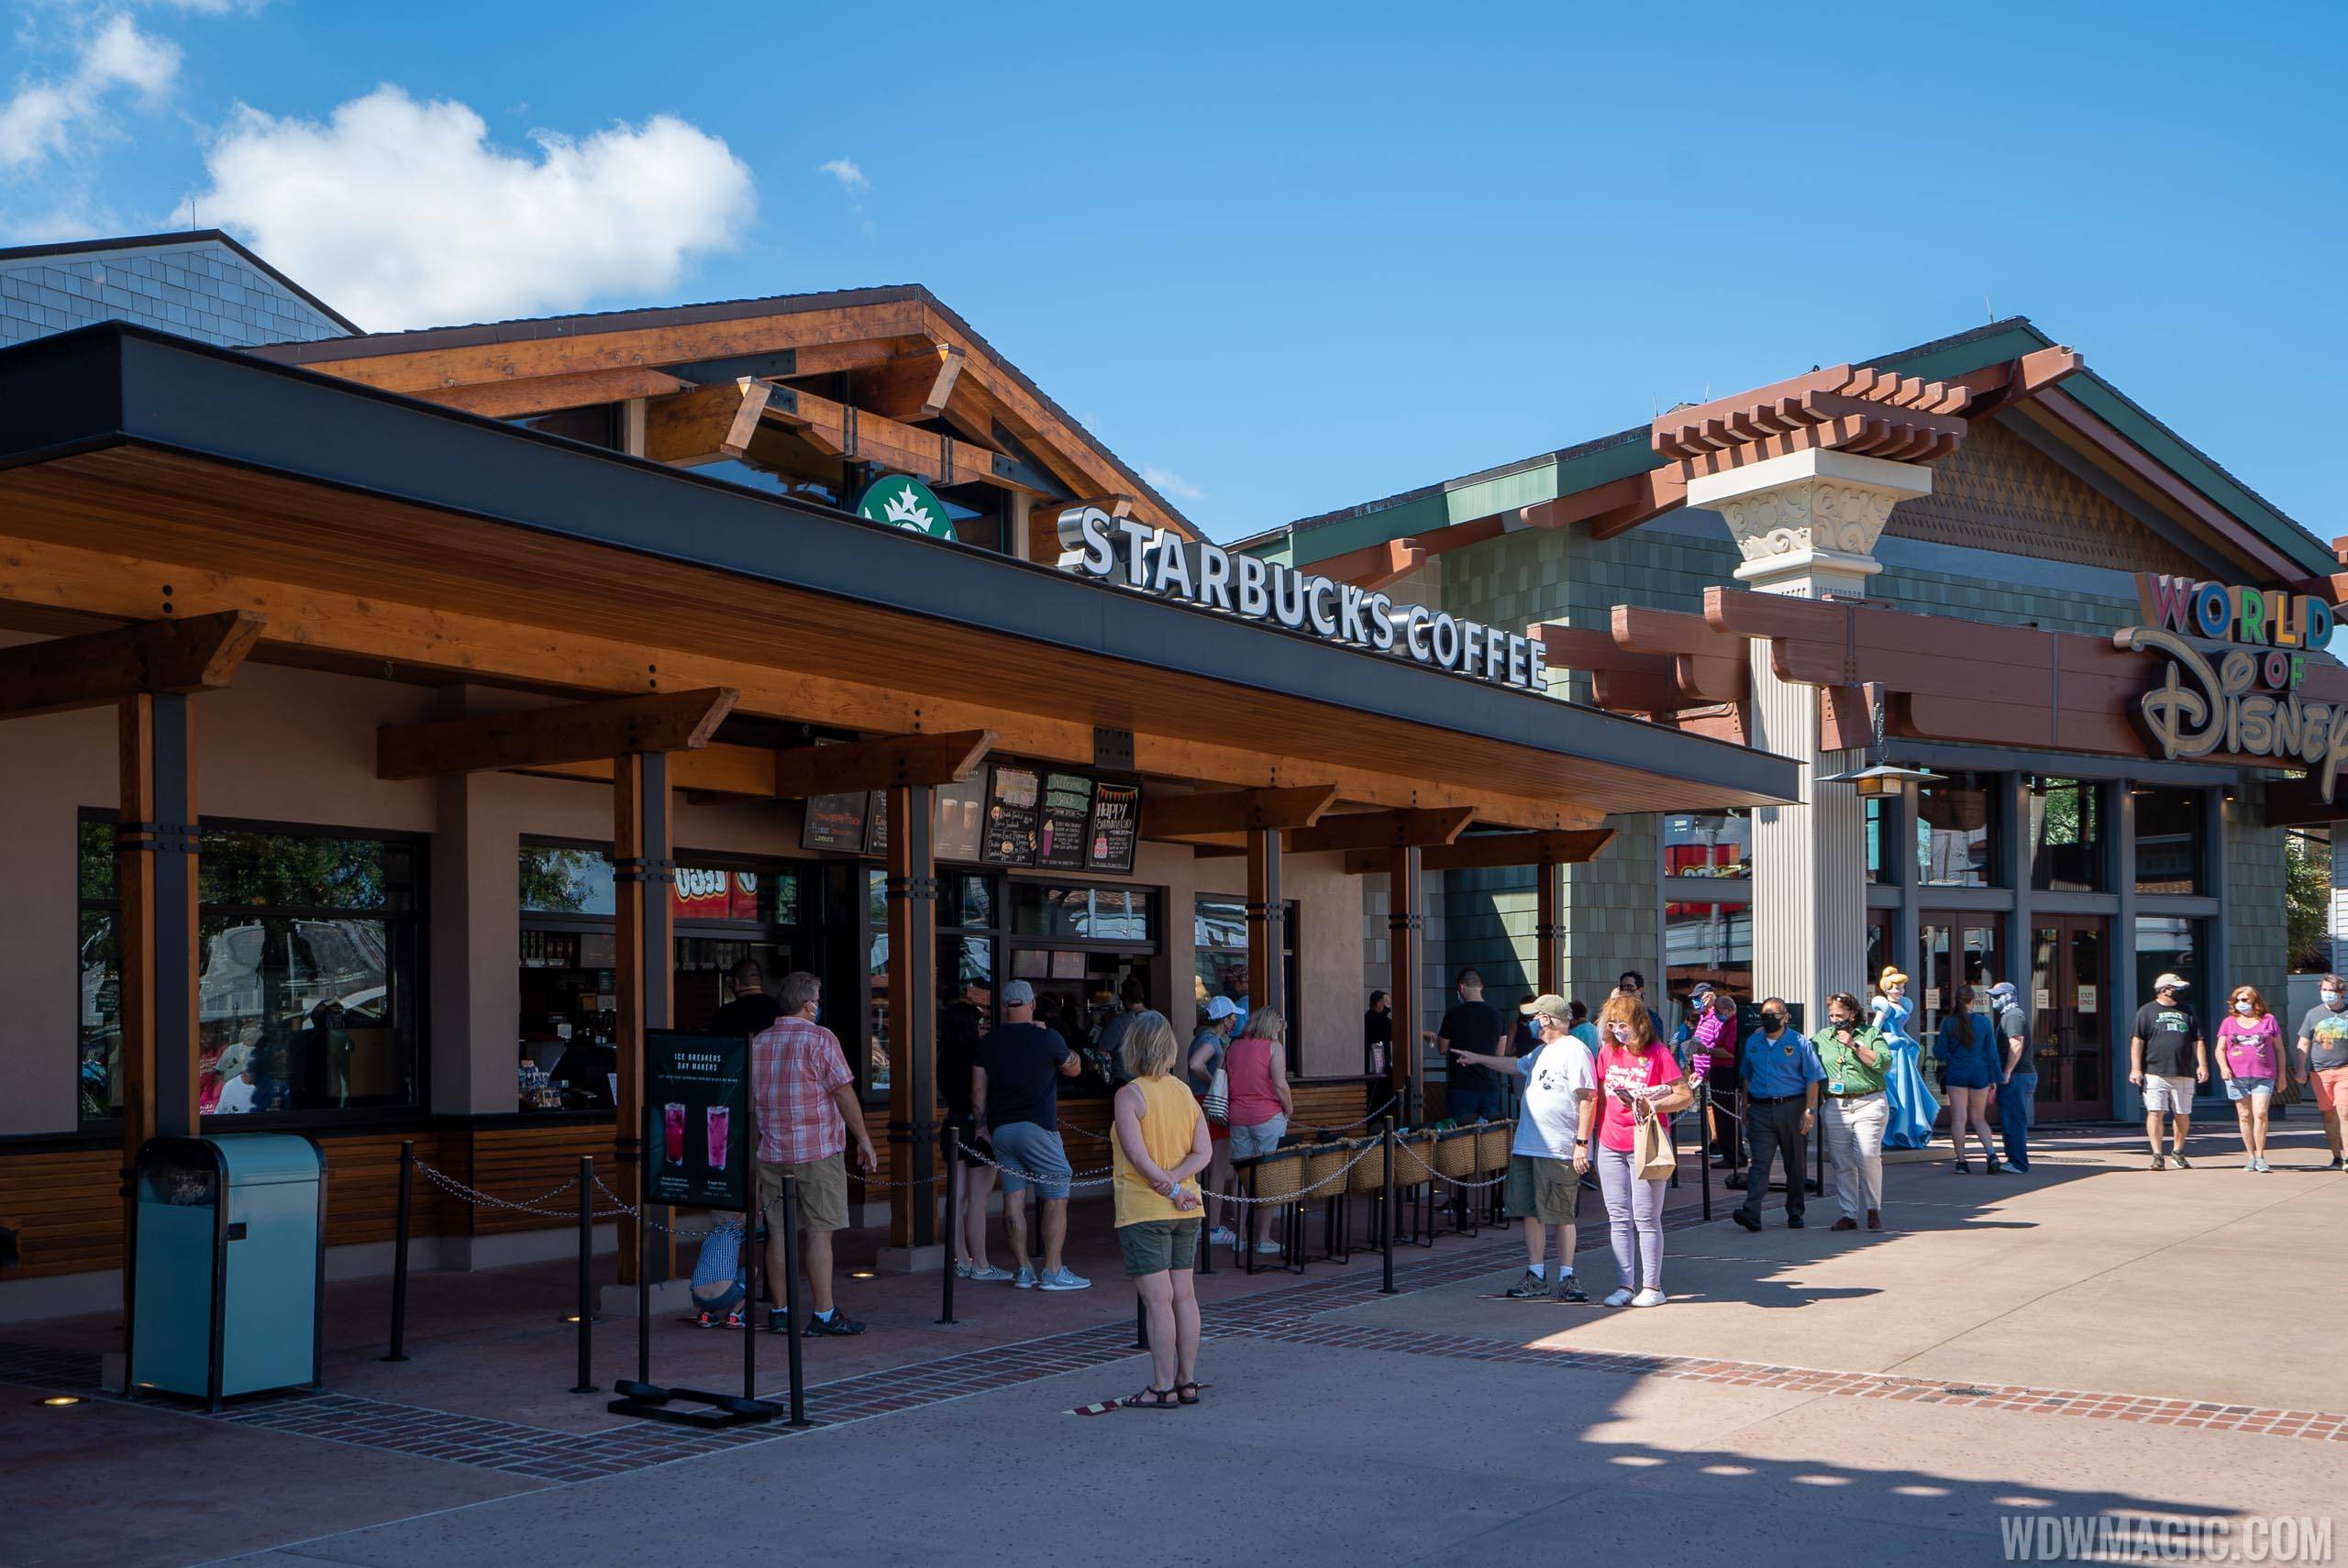 First day of Disney Springs reopening from COVID-19 shutdown